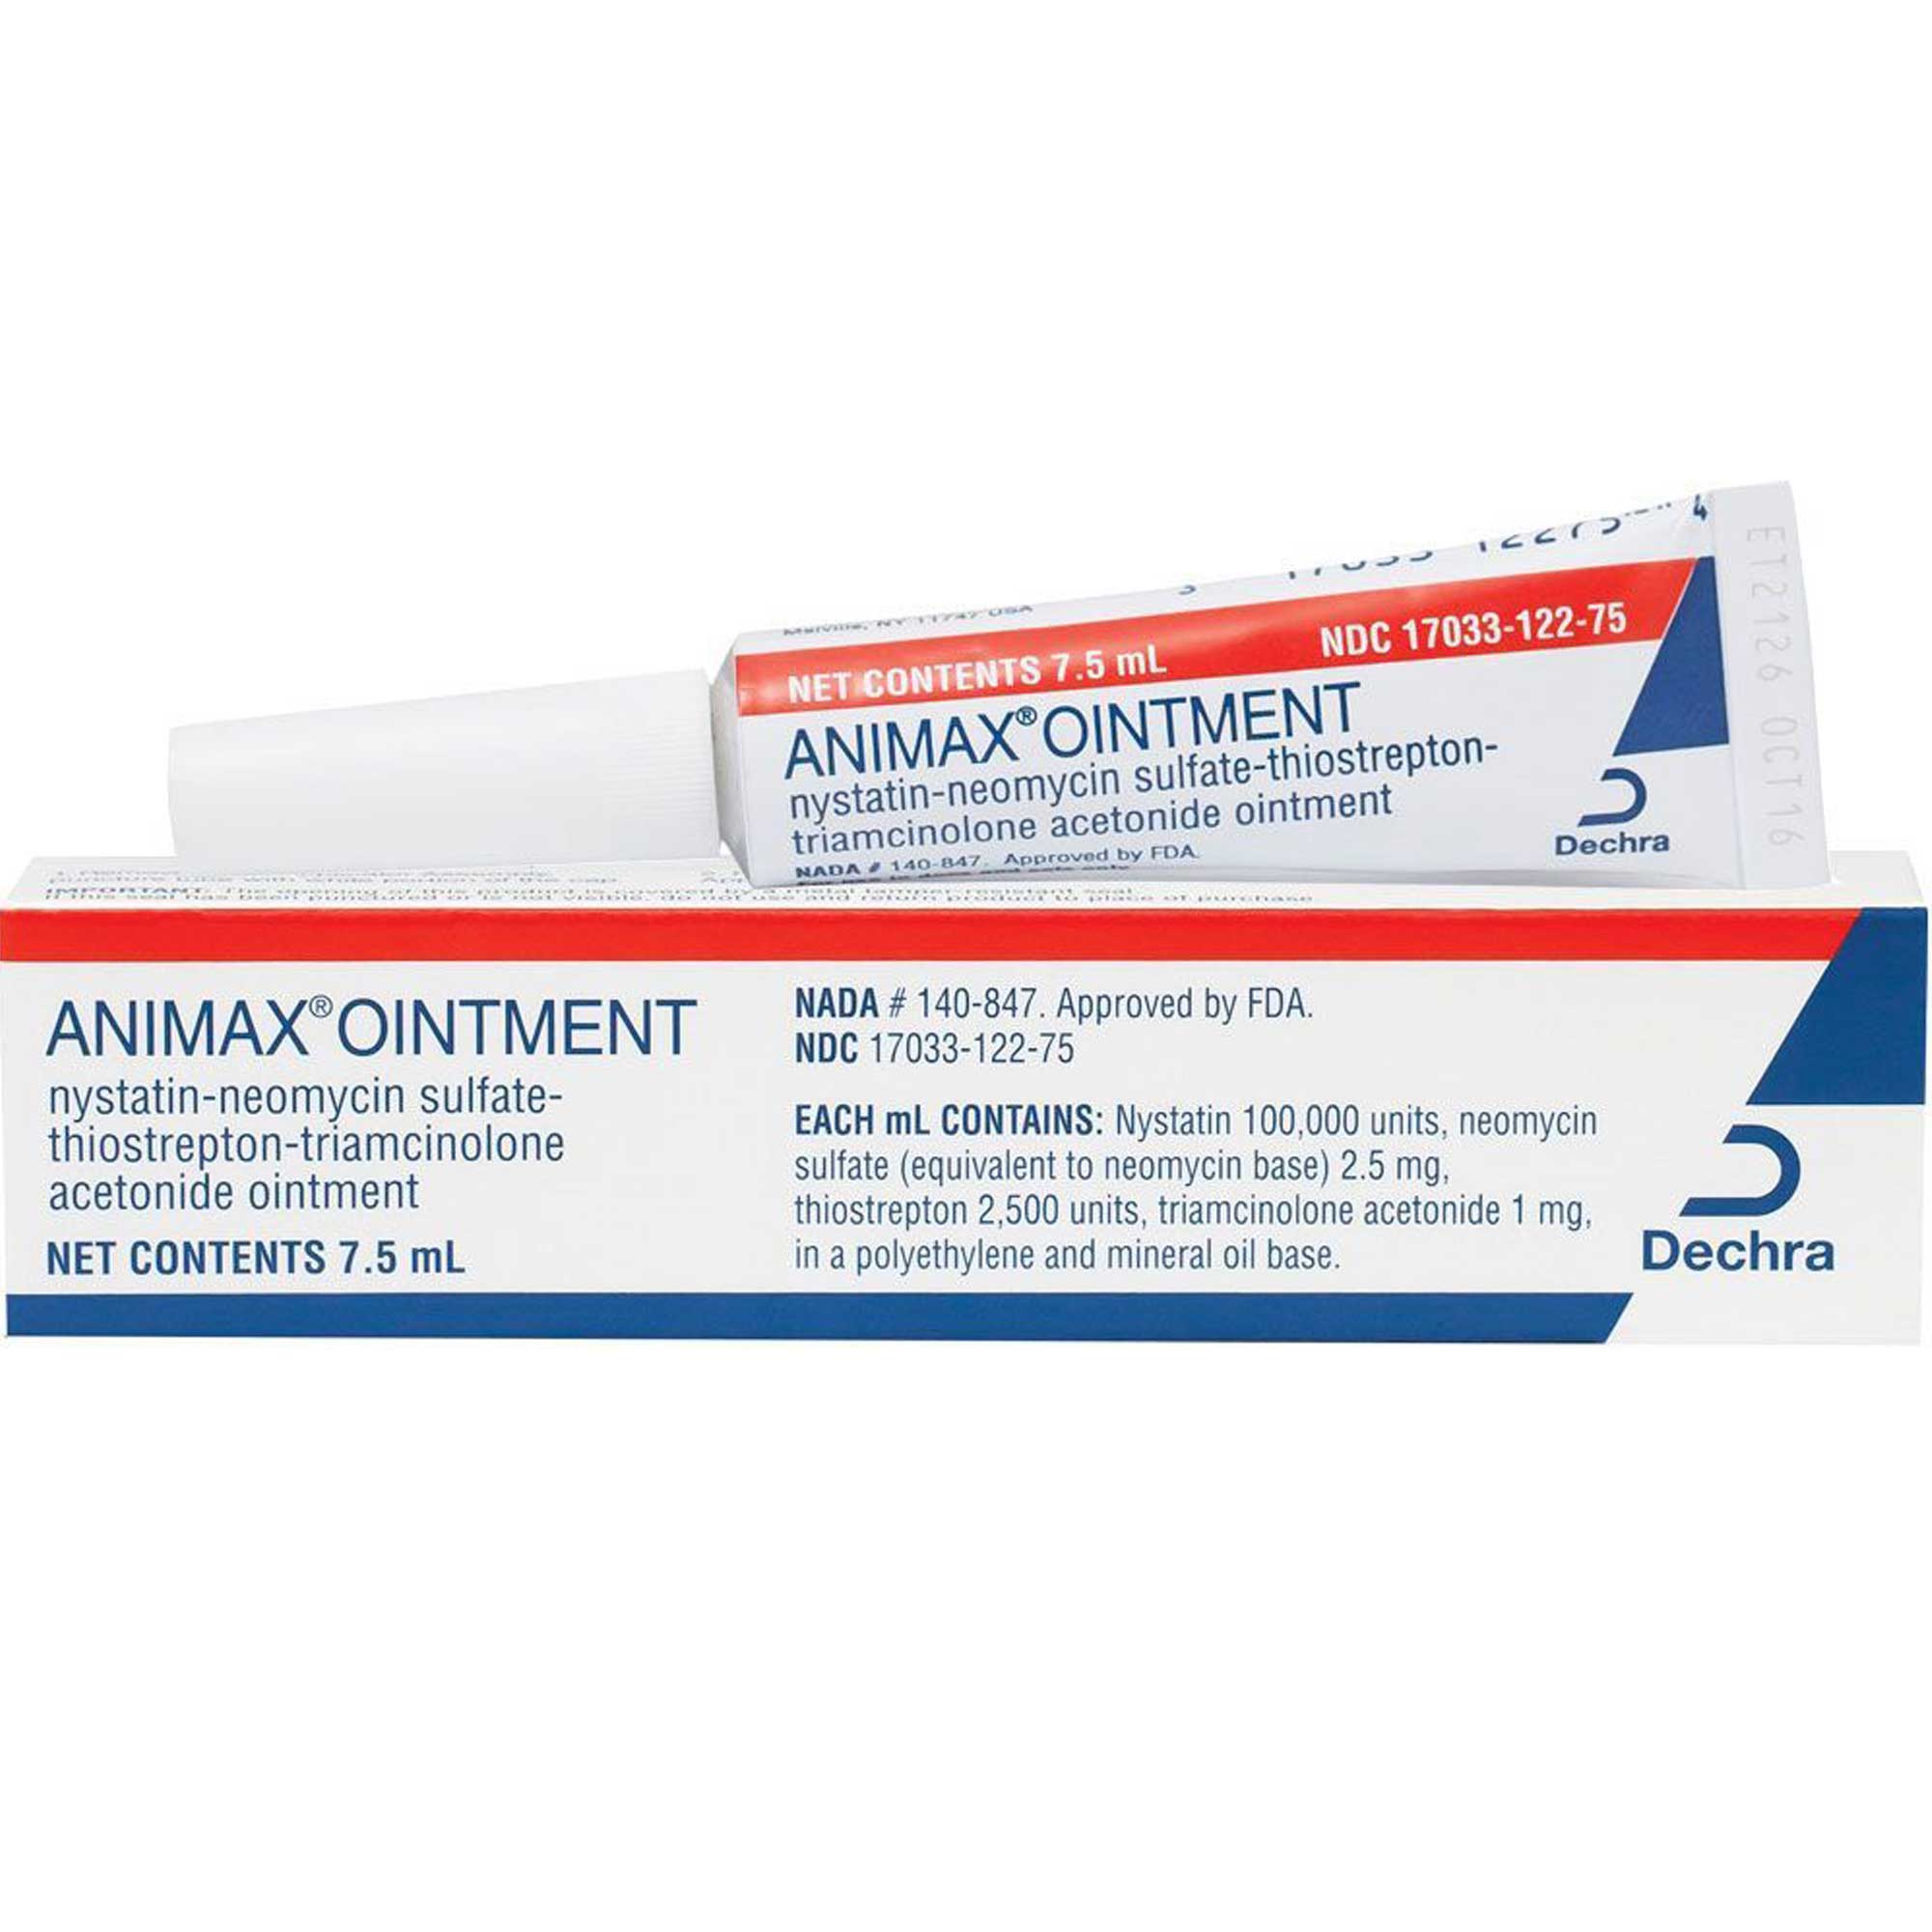 Animax Ointment Usage